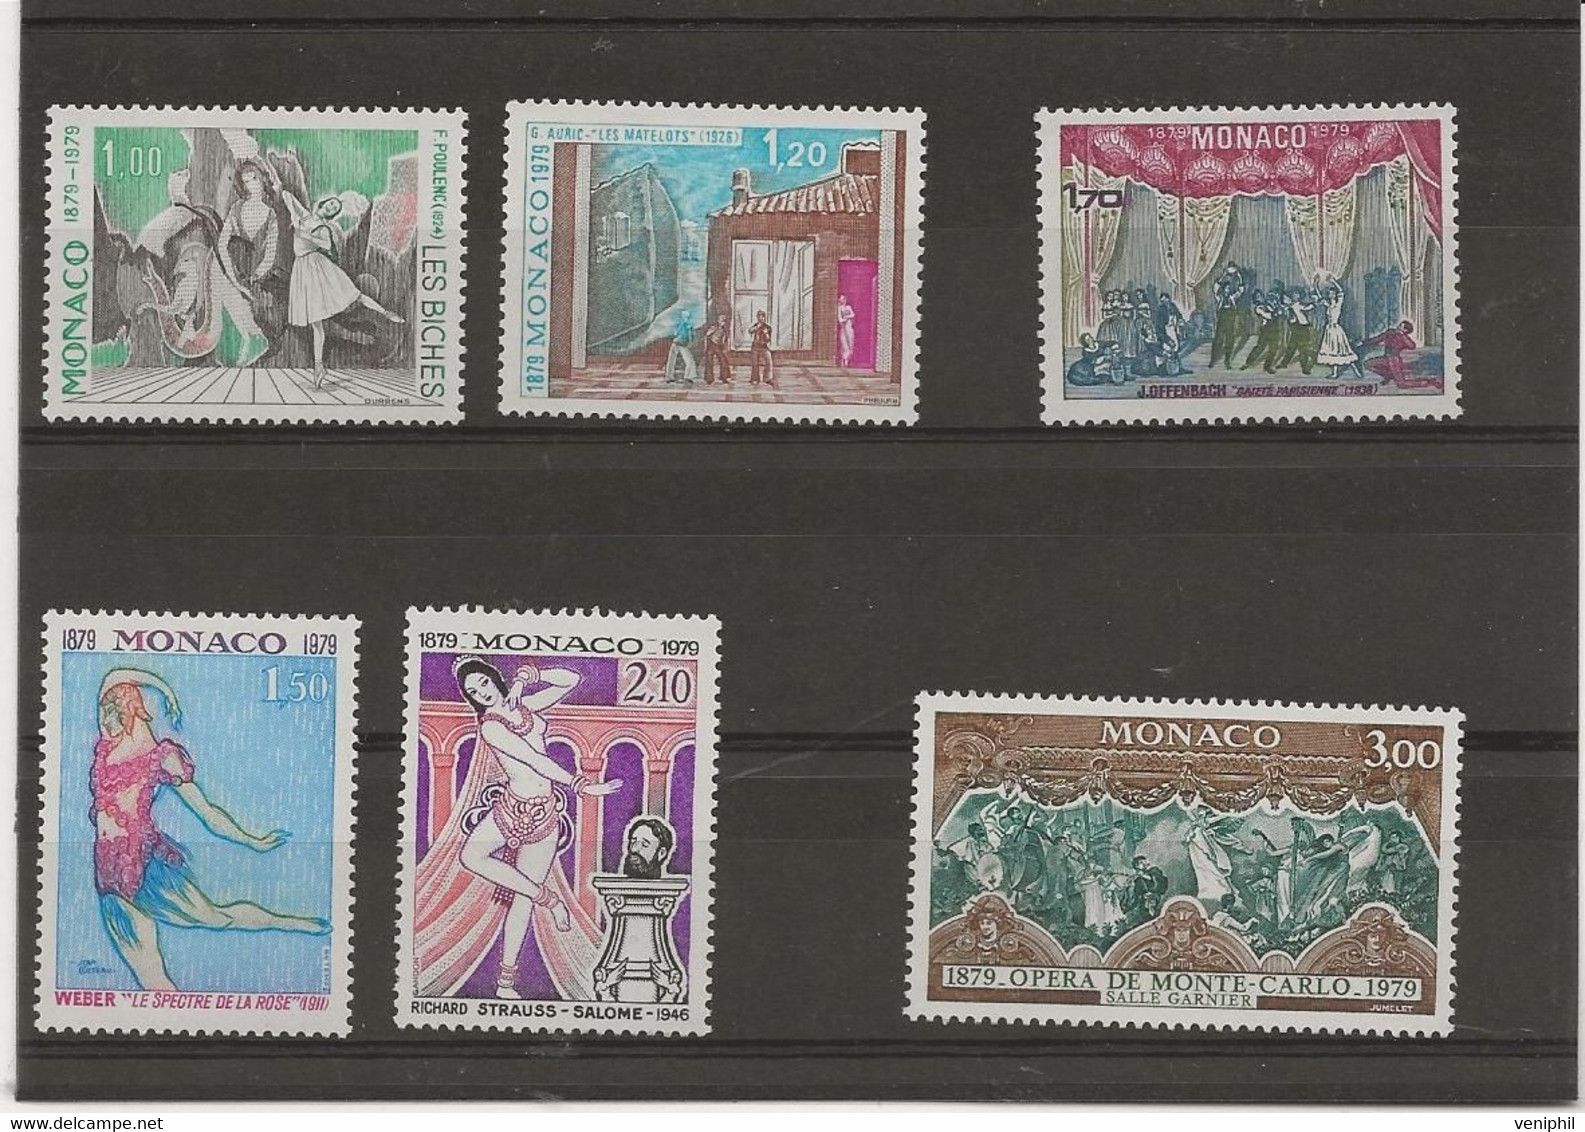 MONACO - TIMBRES N° 1190 A 1195 - NEUF X - ANNEE 1979 - Nuovi